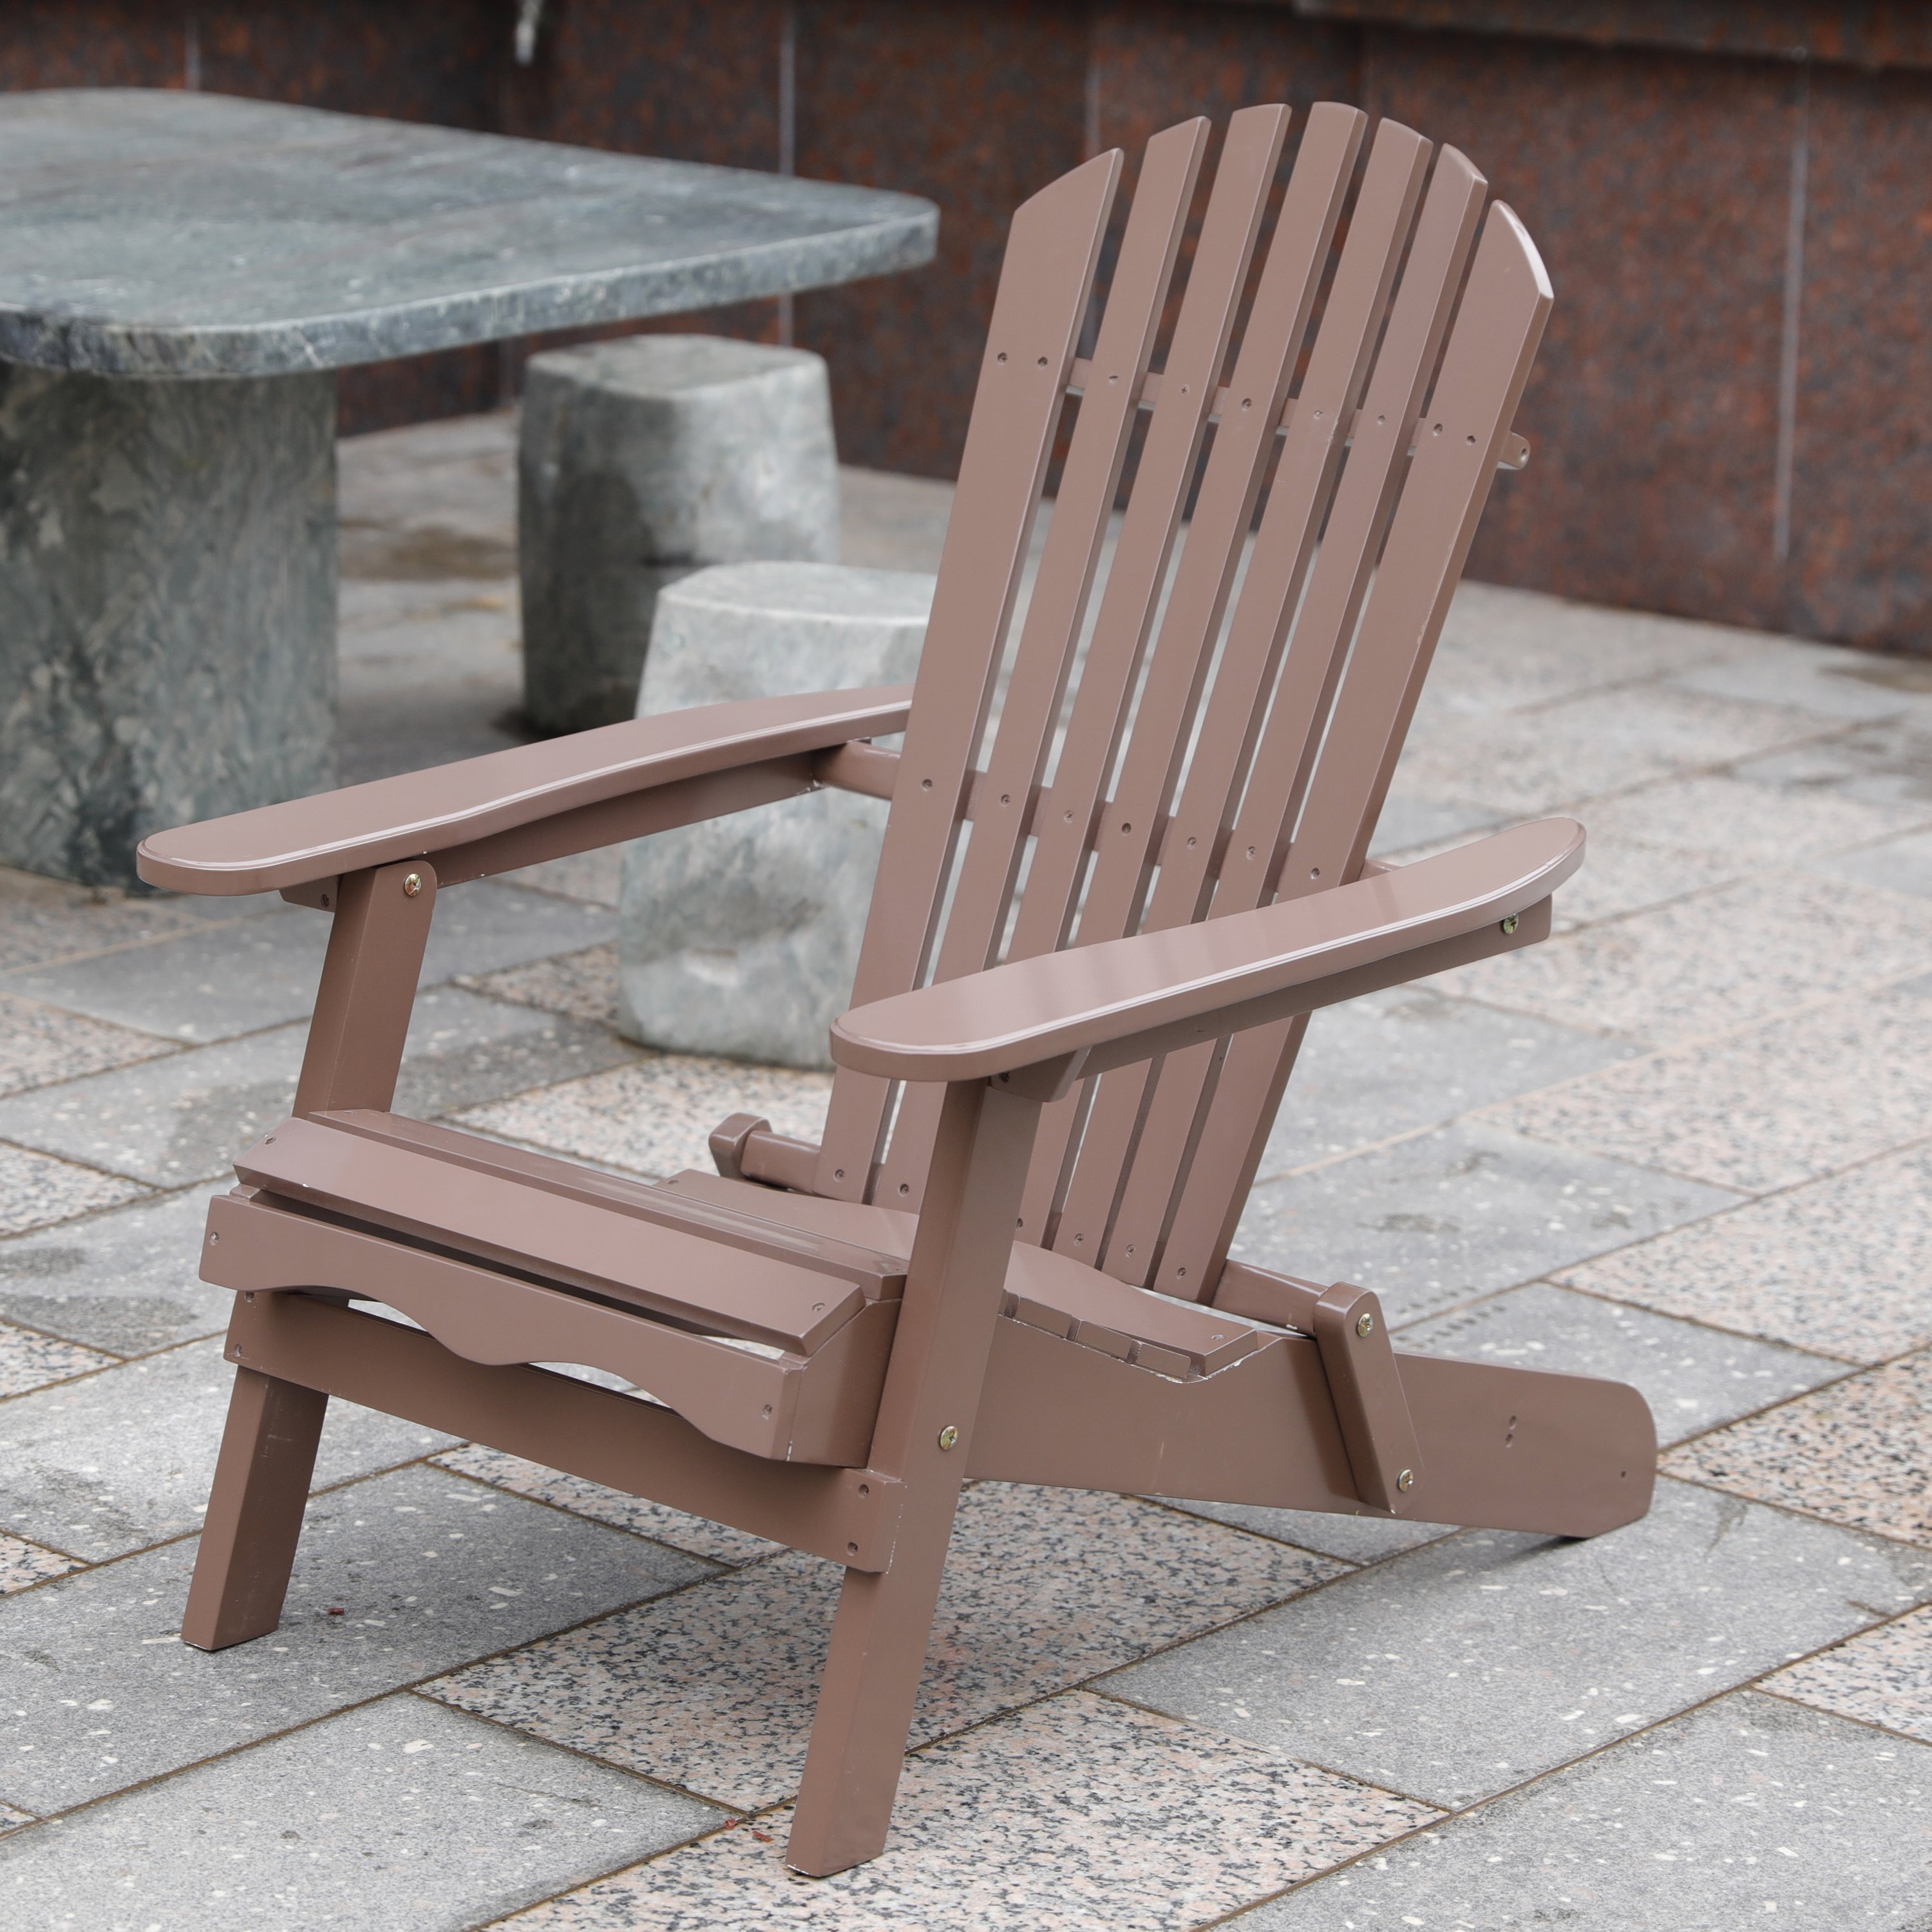 Foldable Adirondack Outdoor Wooden Patio Deck Garden Lounge Chair, Brown - image 4 of 6